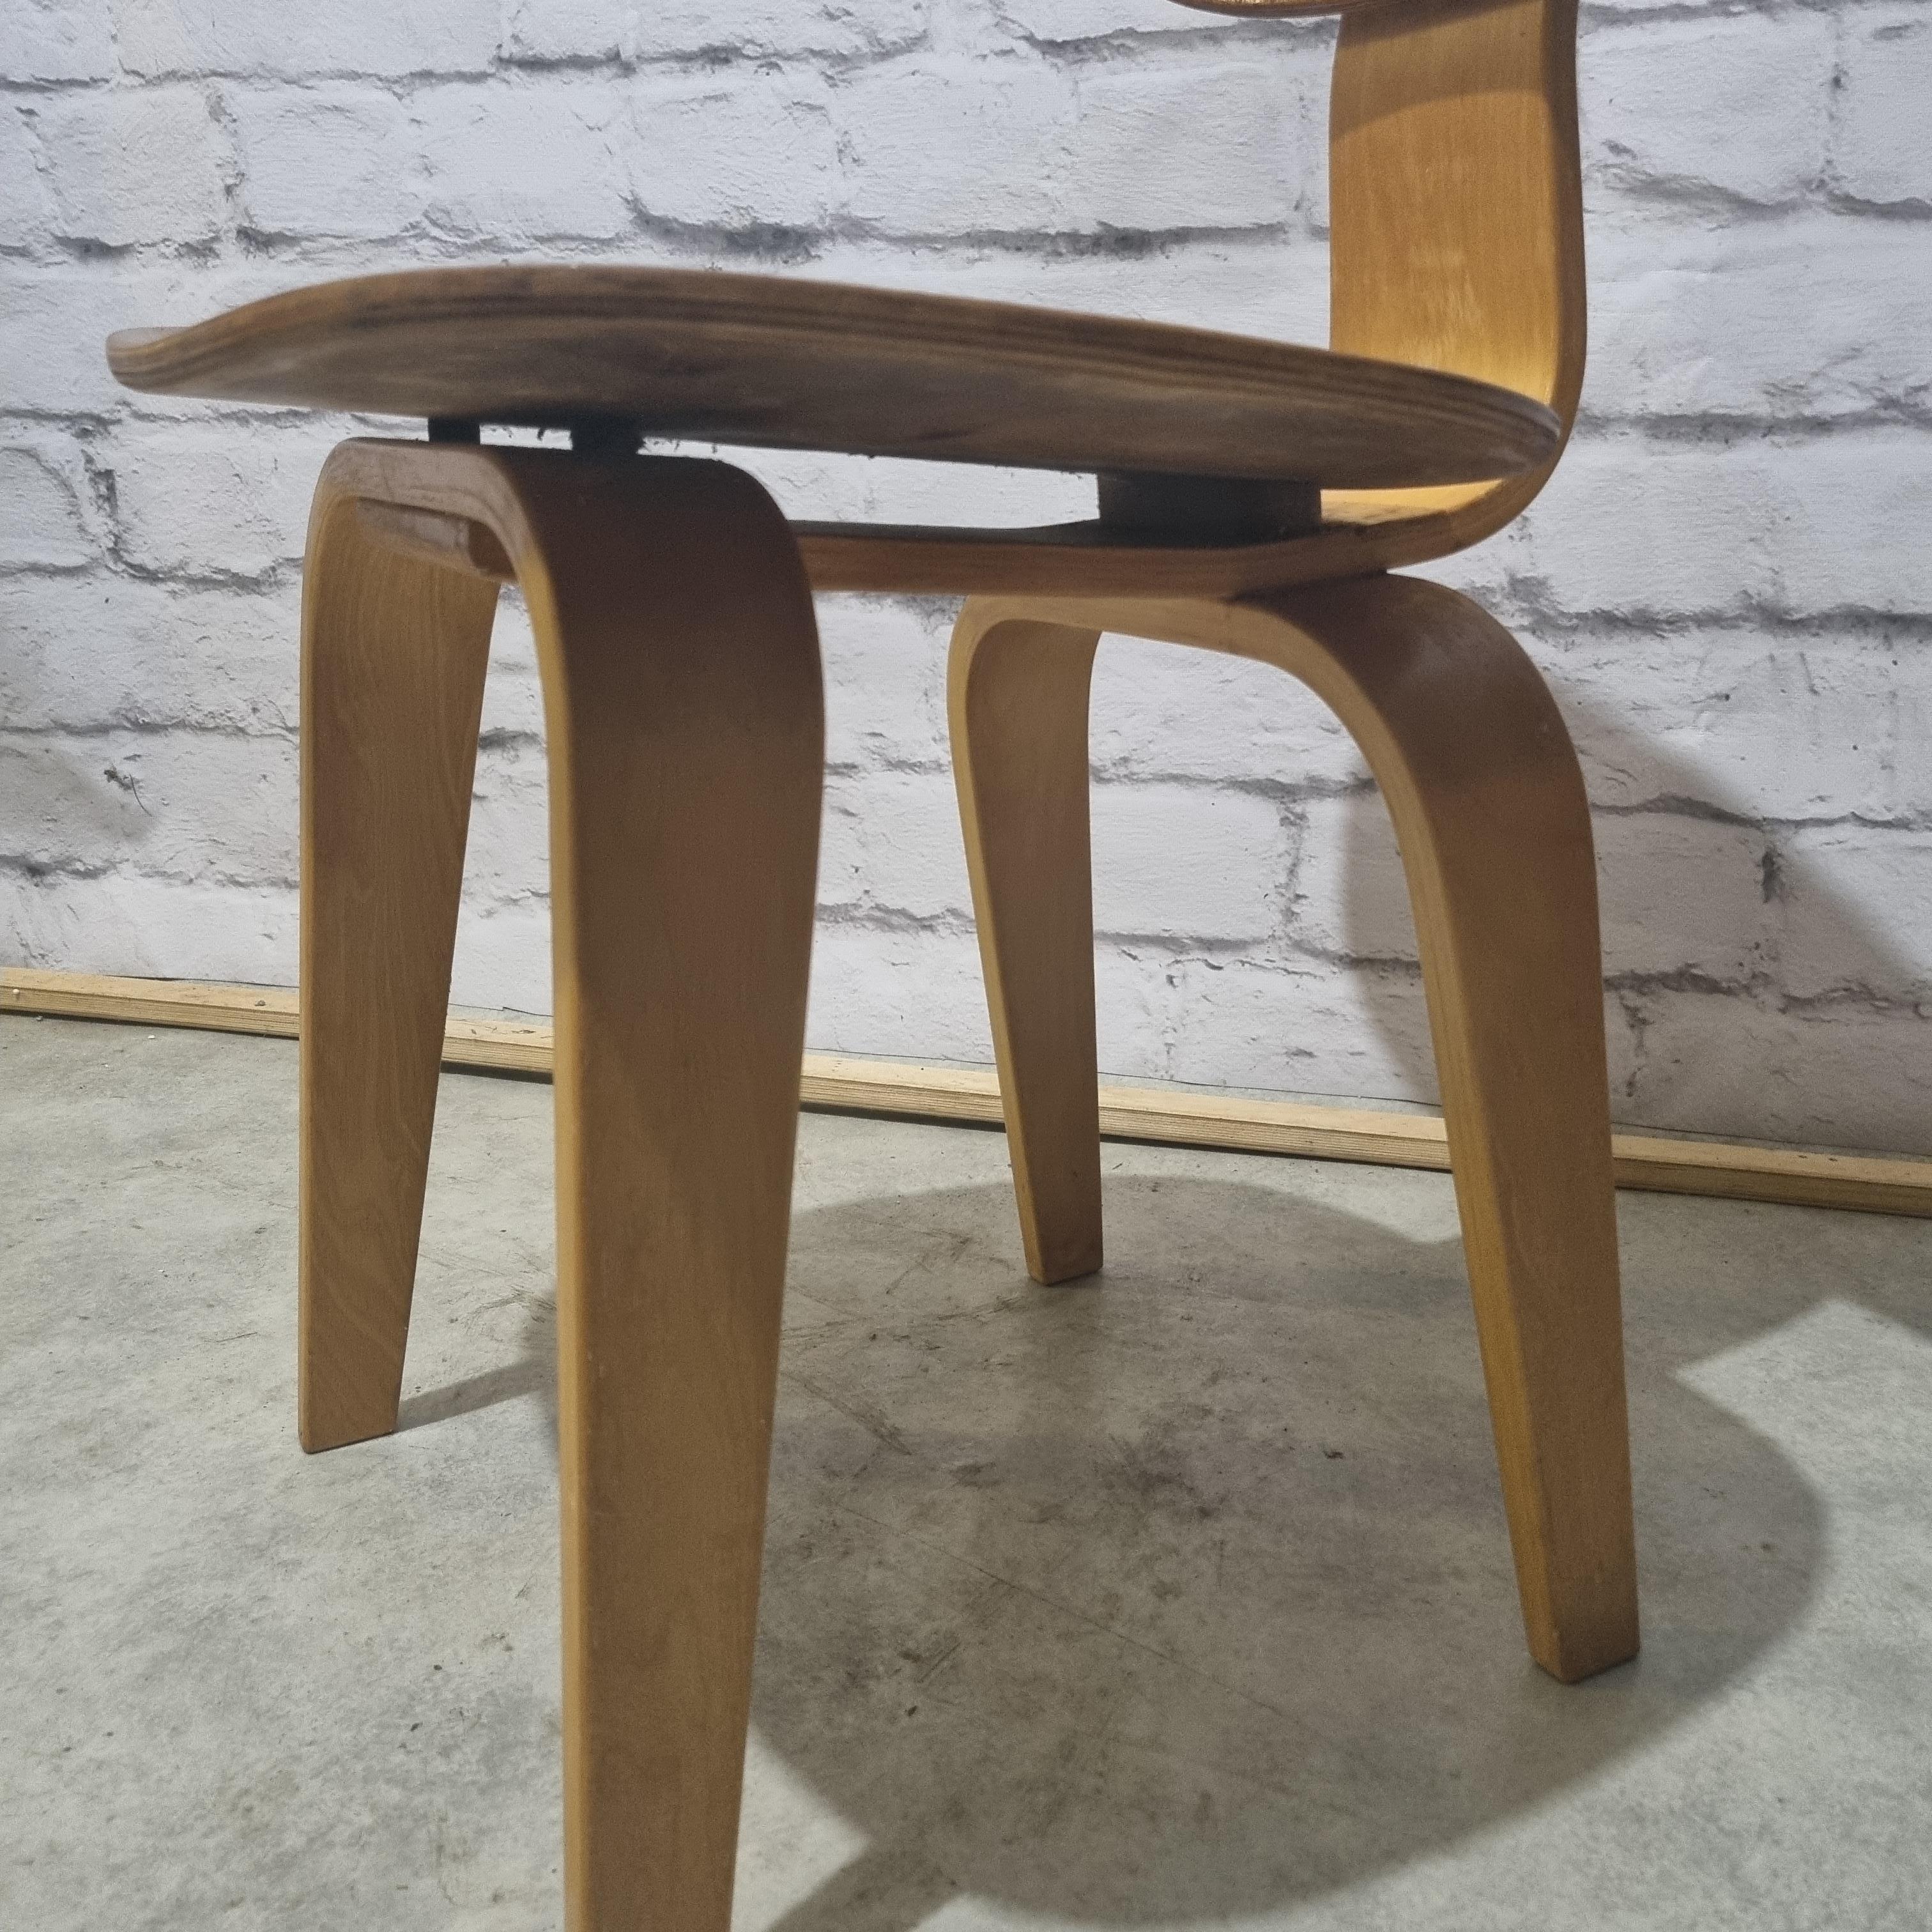 SB02 dining chair or side chair was designed in 1952 by Cees Braakman and manufactured in the Netherlands by UMS Pastoe. When Braakman designed these chairs, he was clearly inspired by the works of Charles & Ray Eames, having been on a recce to the